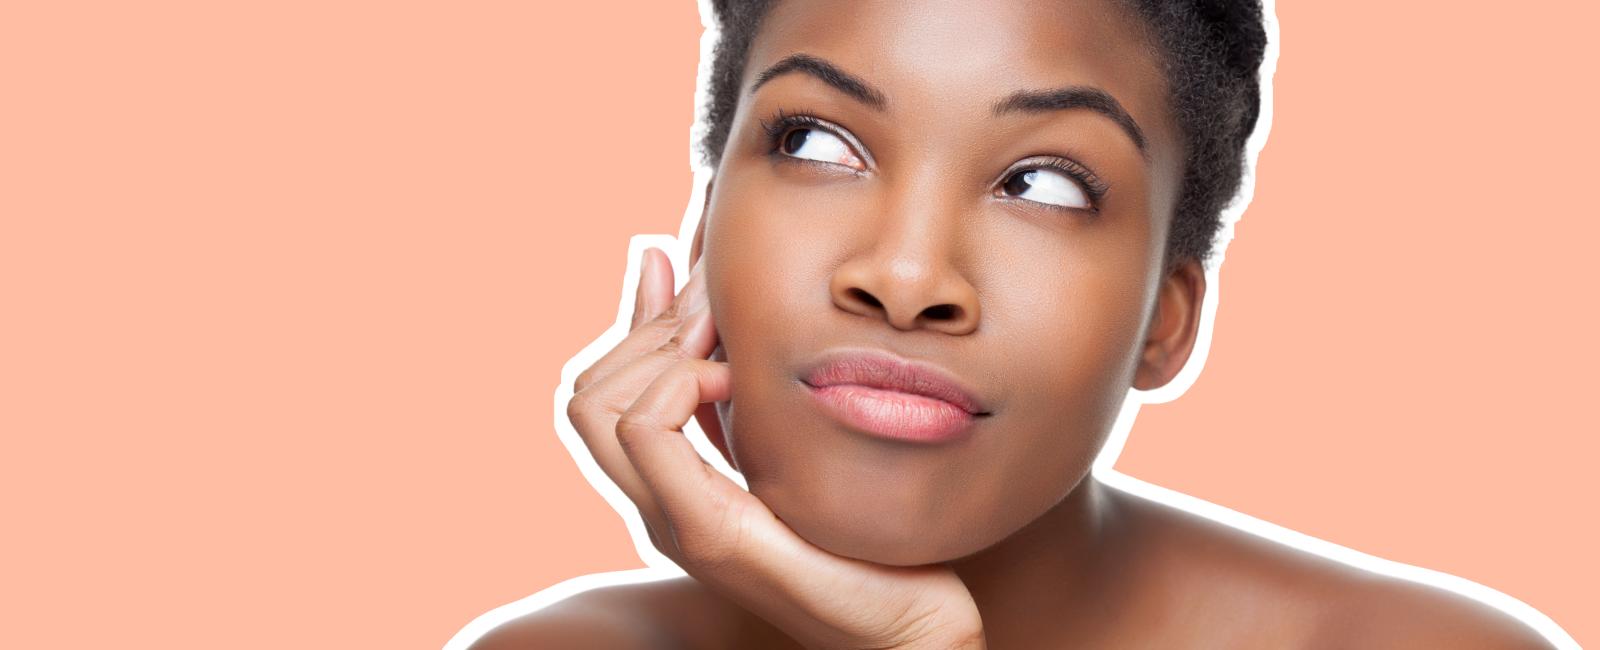 7 Cleansing Habits of the Skincare Savvy You Need to Adopt 